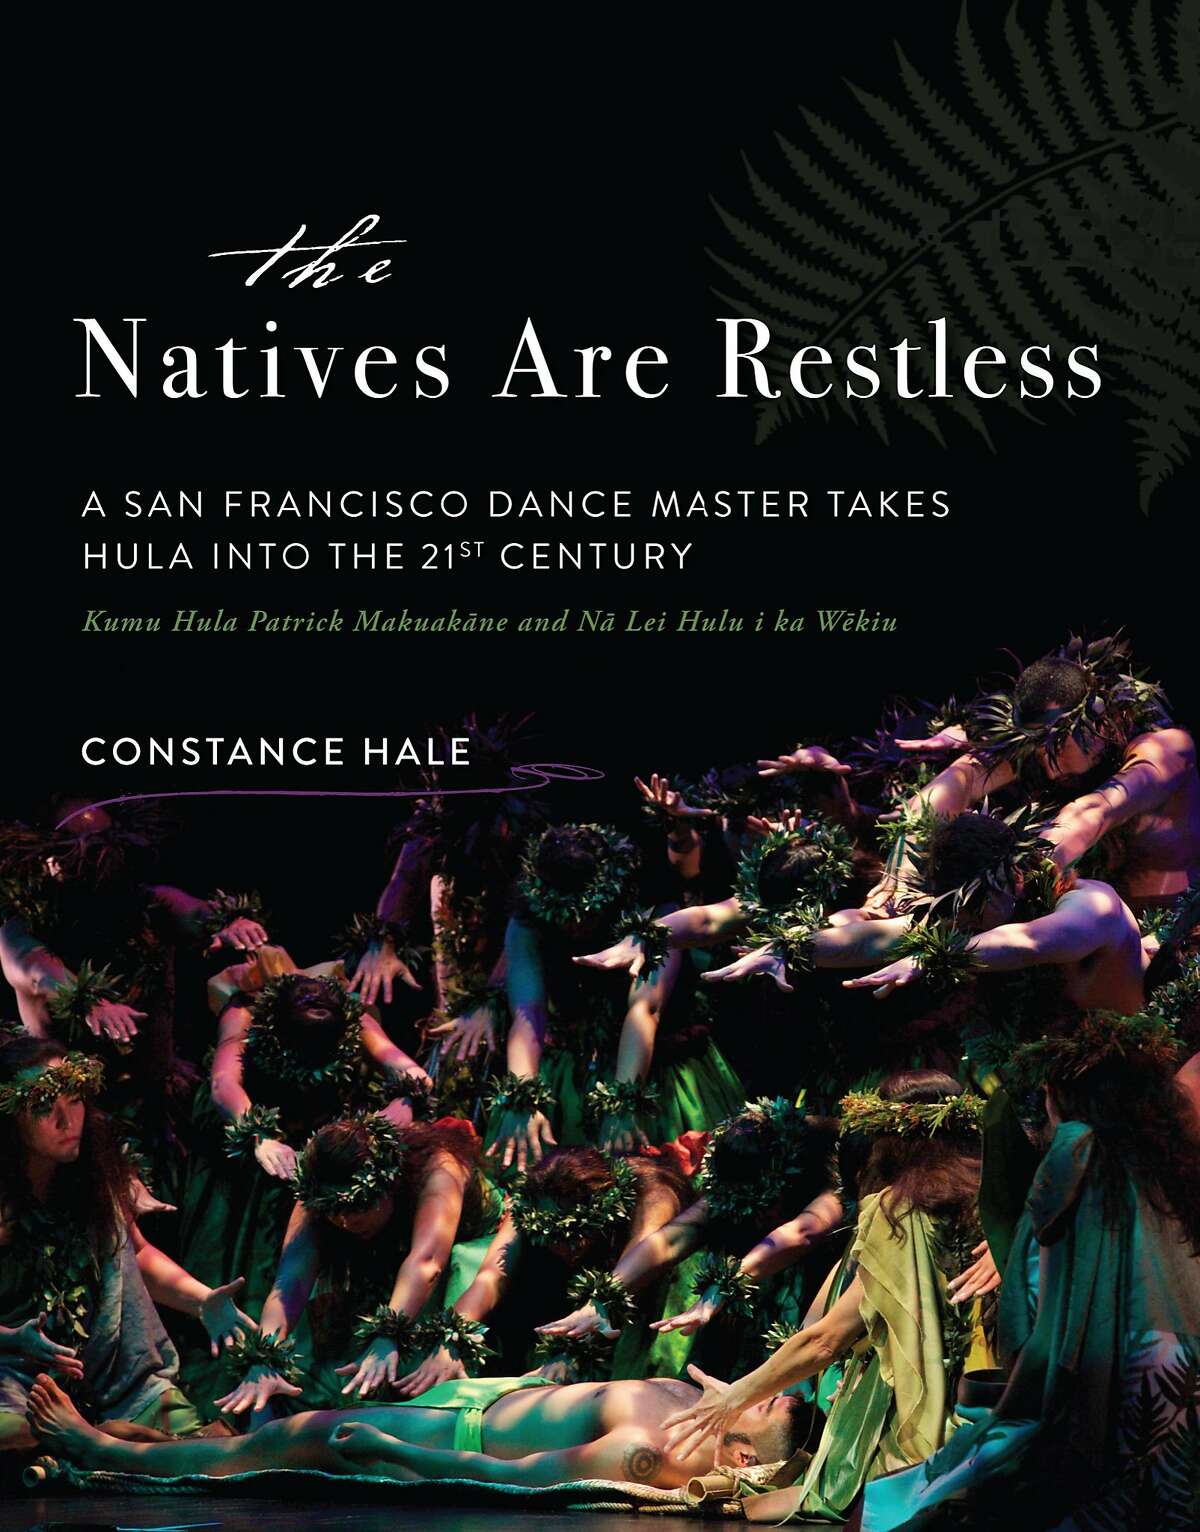 "The Natives are Restless: A San Francisco Dance Master Takes Hula into the 21st Century," by journalist Constance Hale.